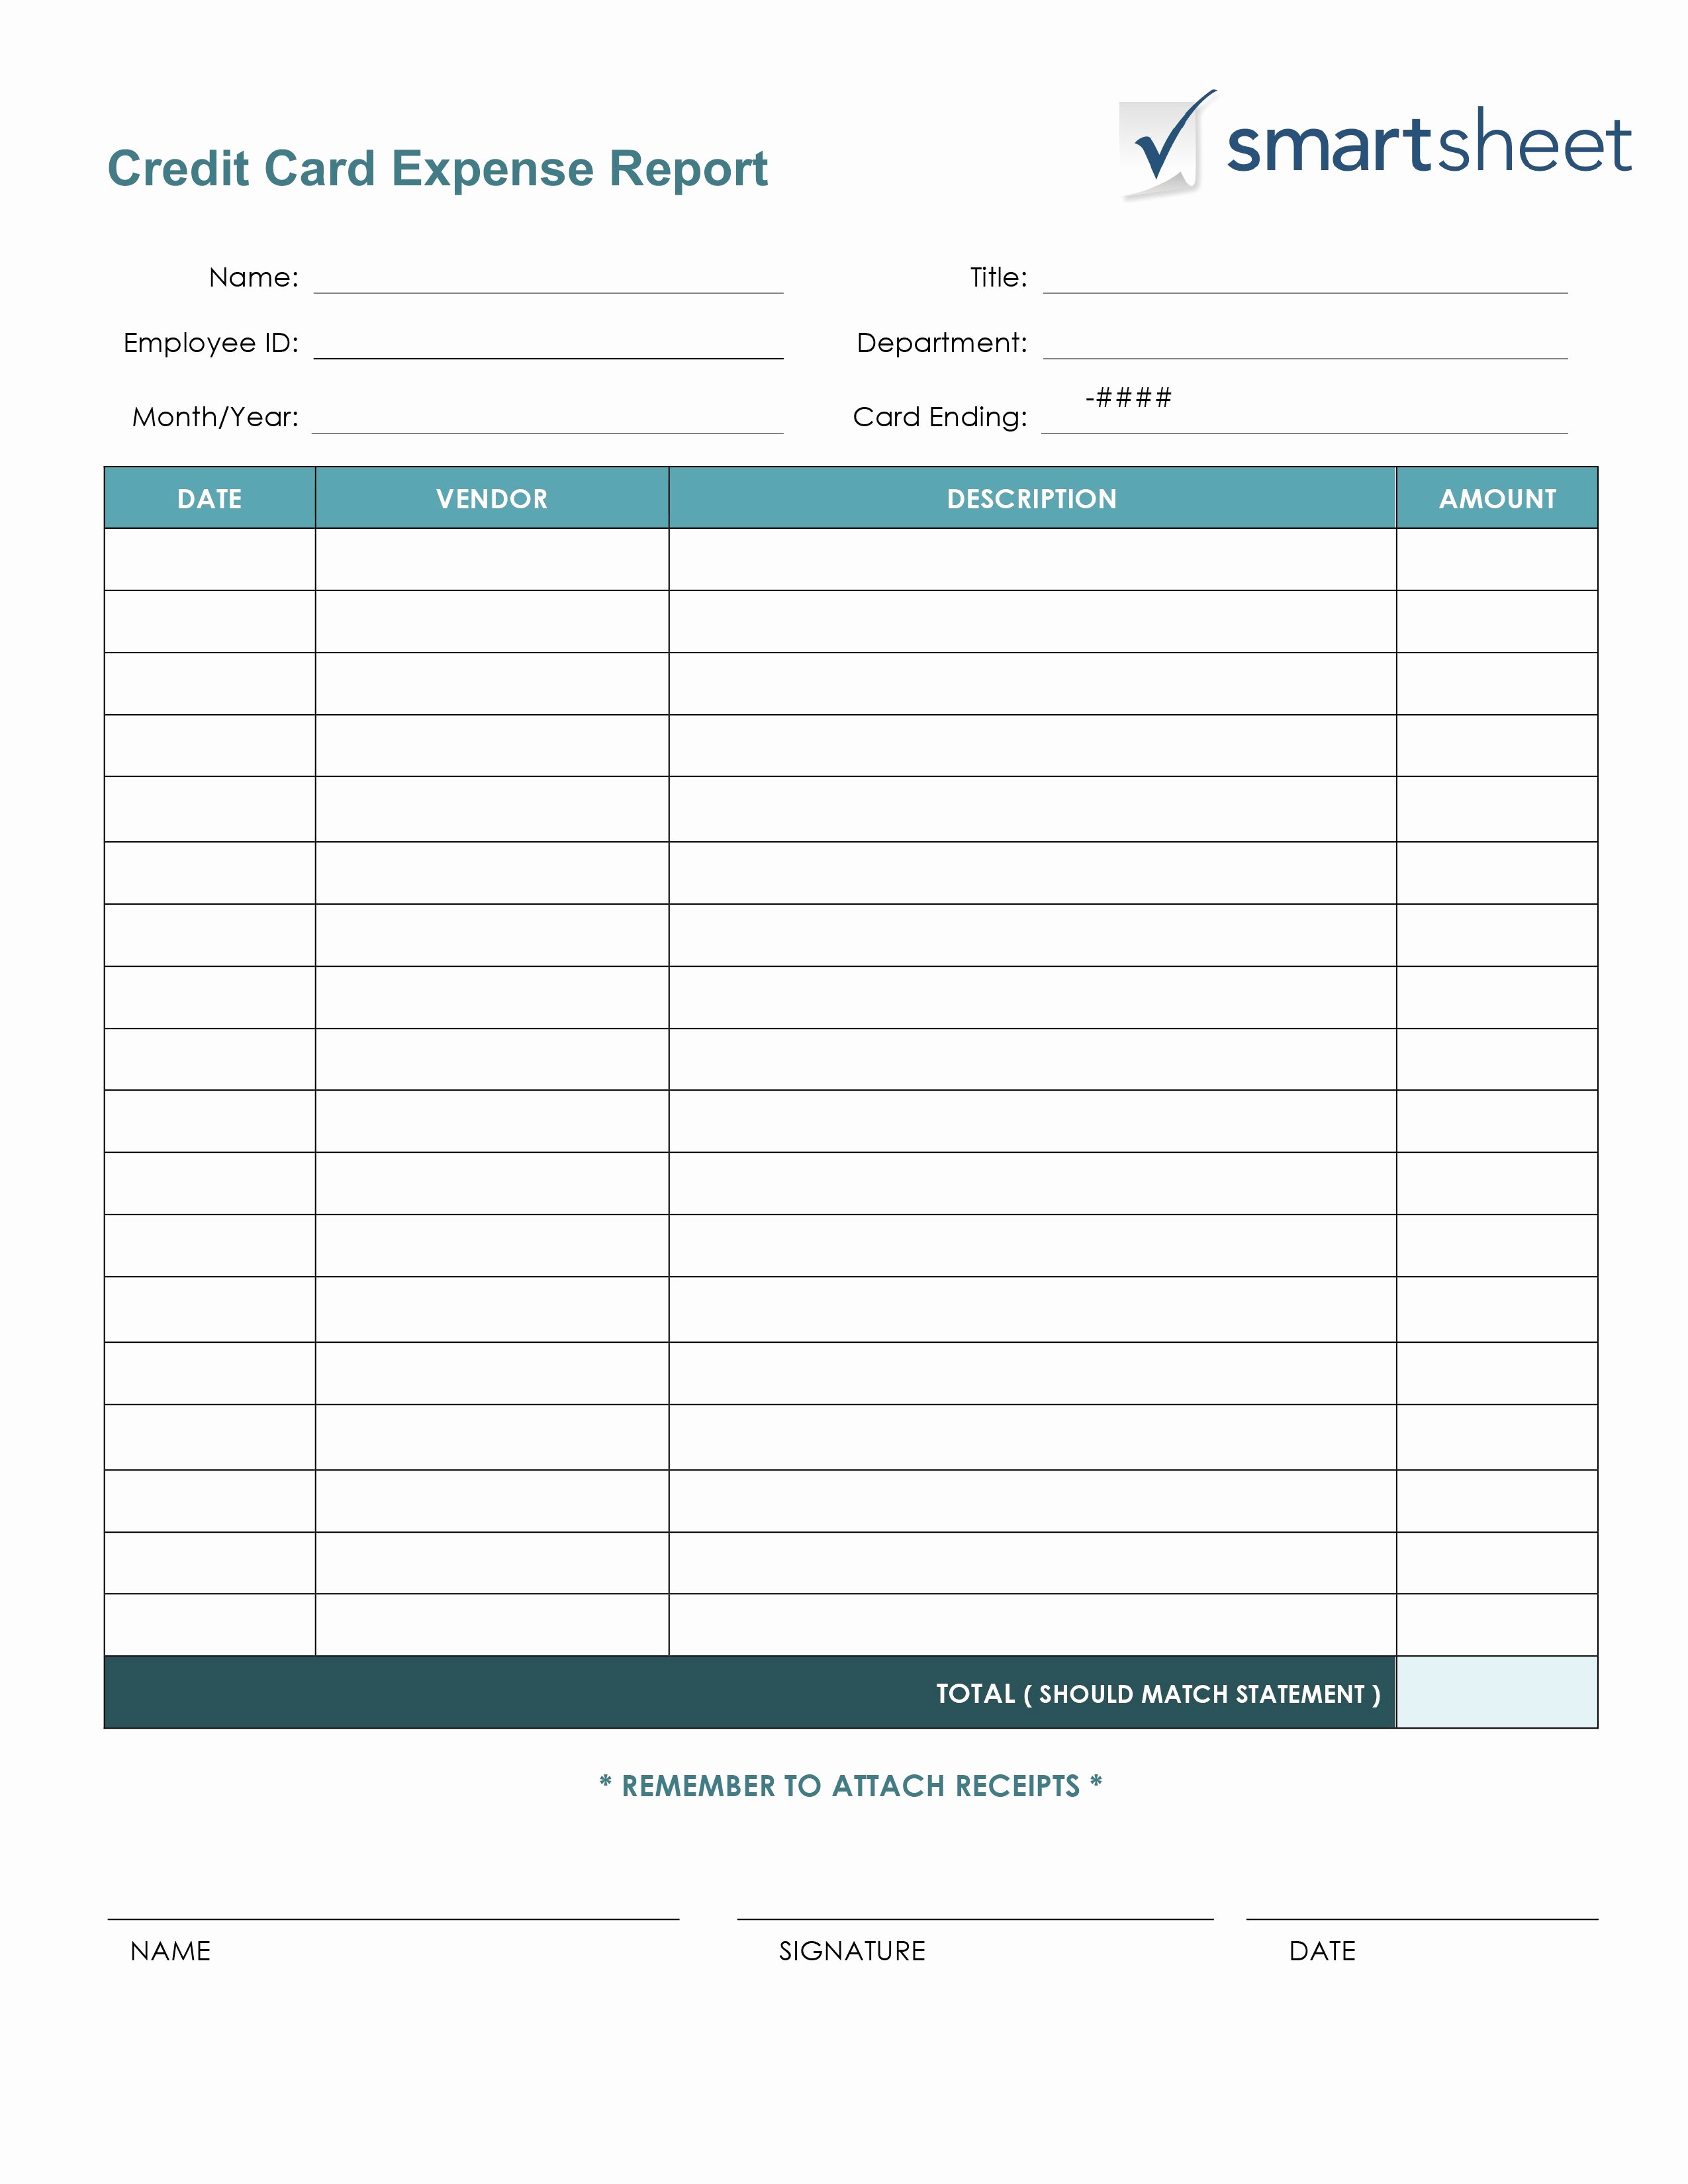 Business Expense Report Template Fresh Free Expense Report Templates Smartsheet